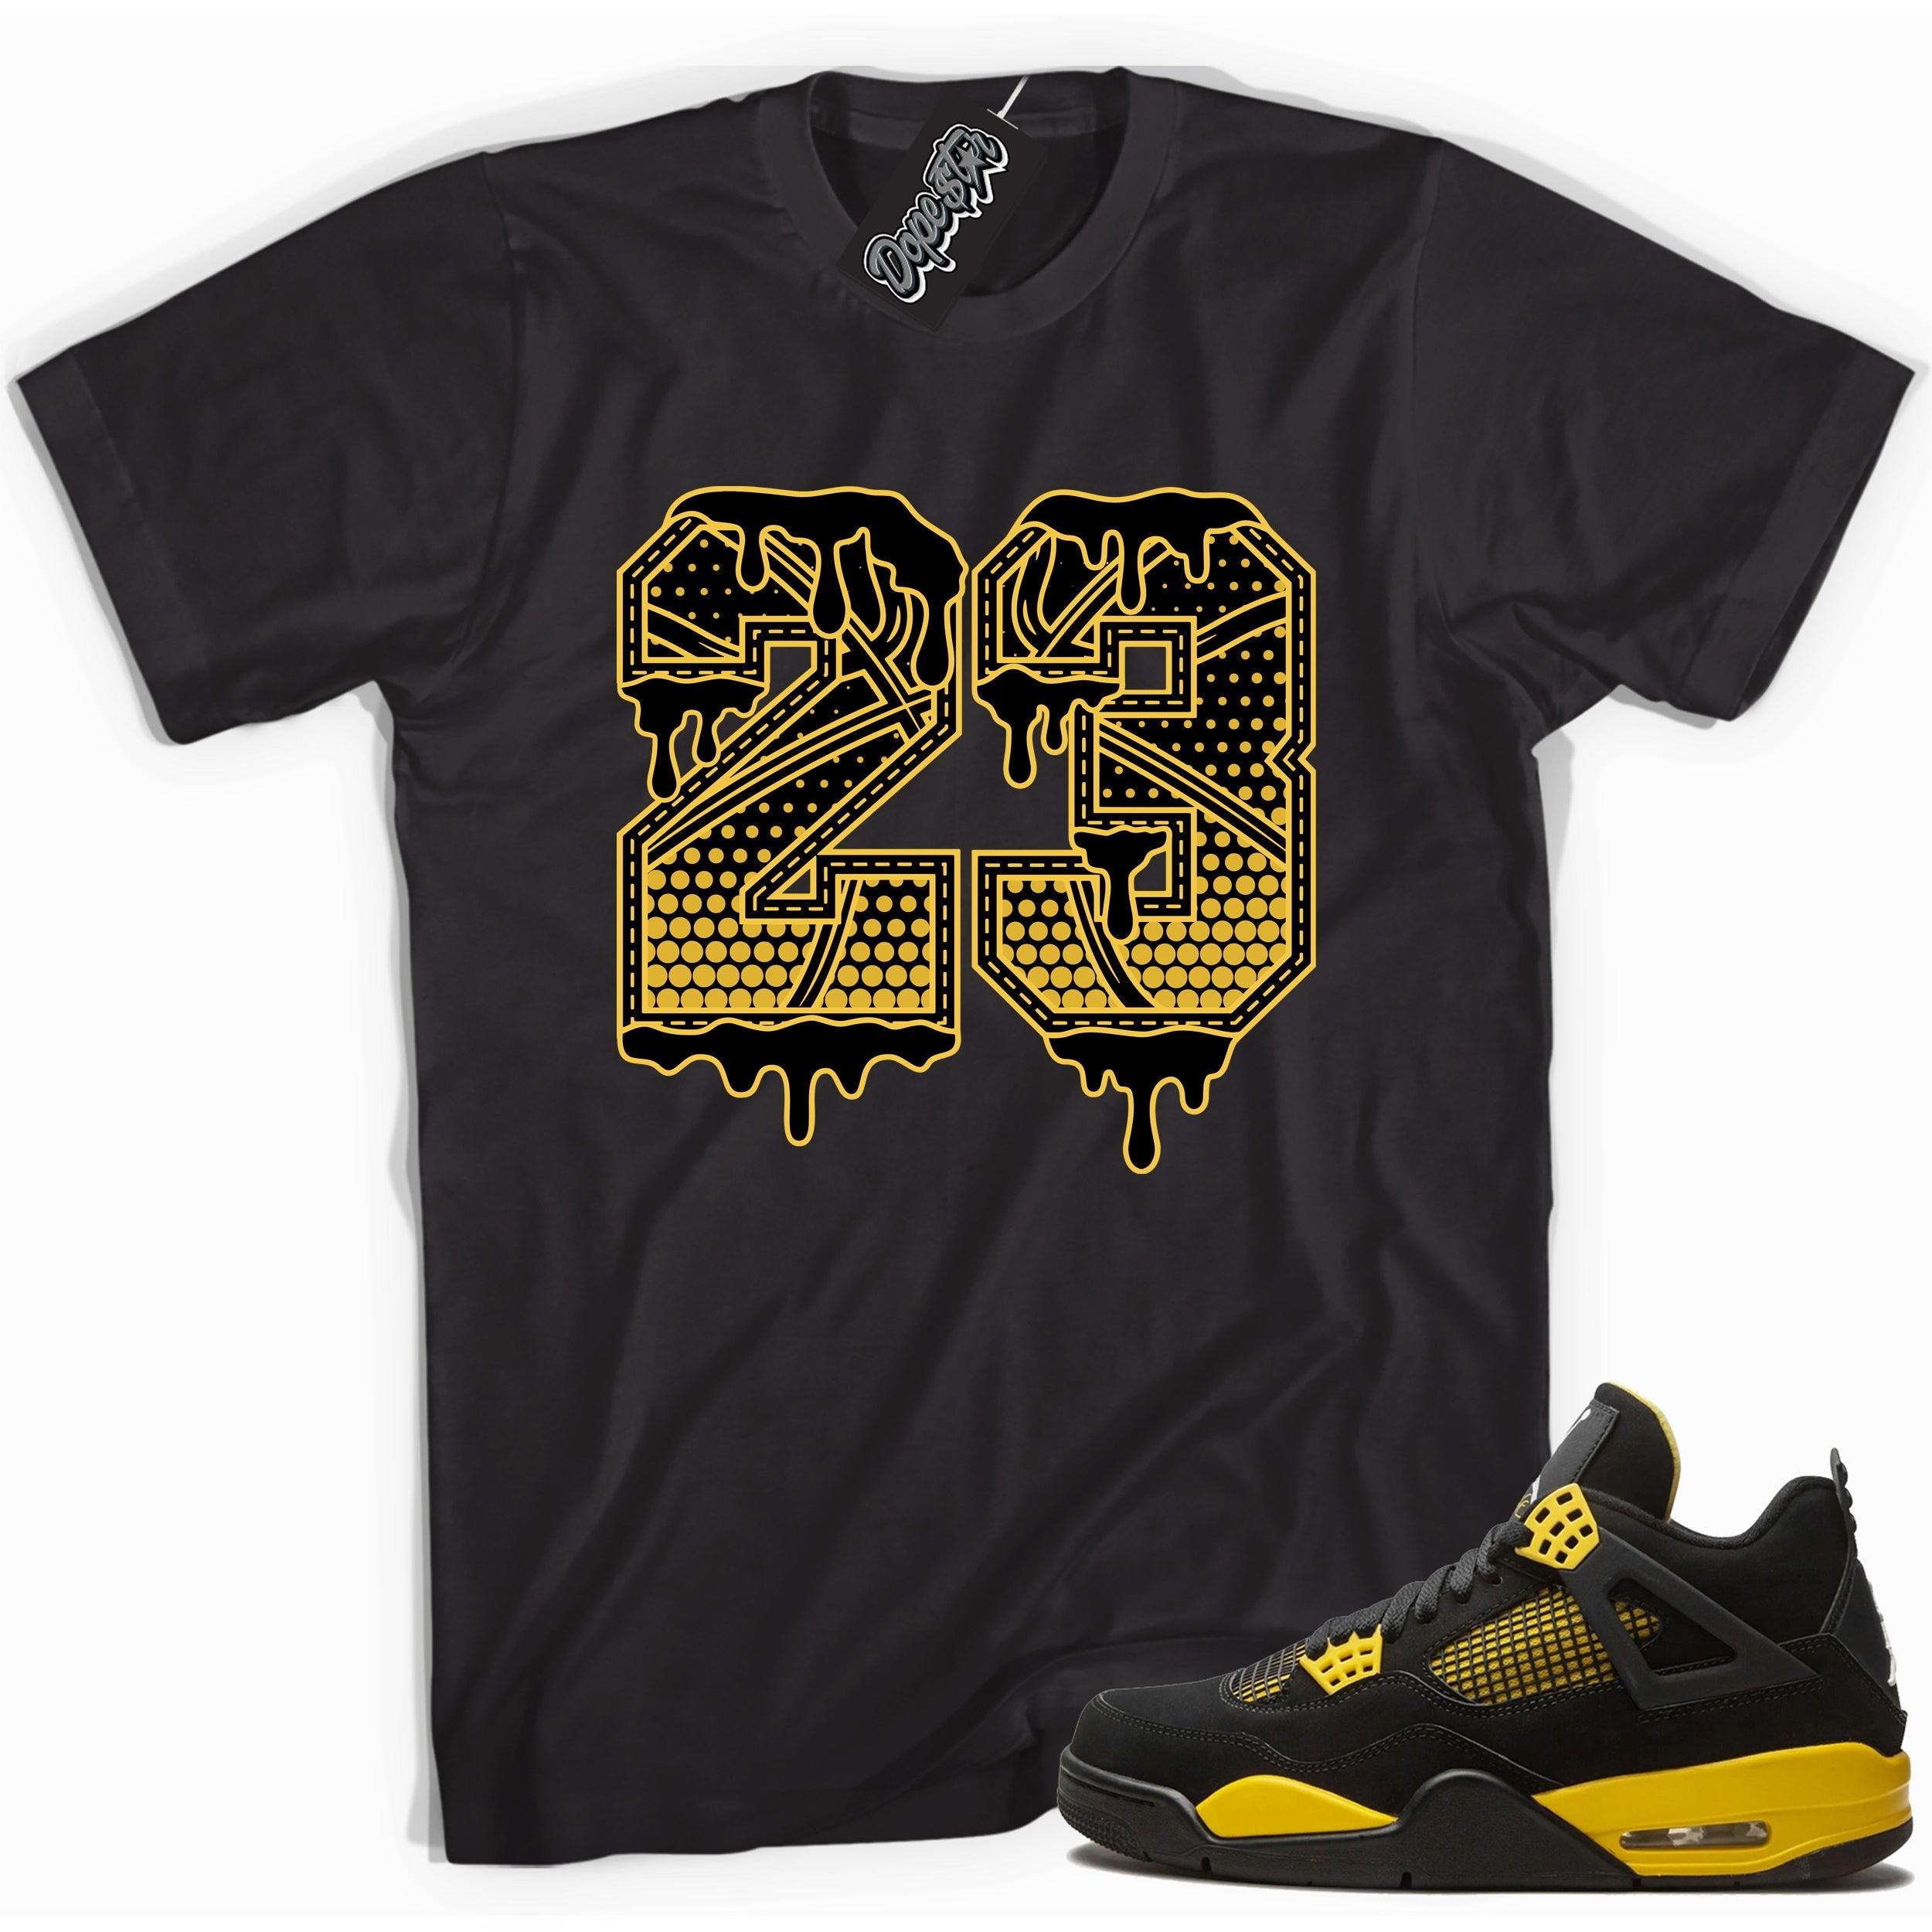 Cool black graphic tee with '23 basketball' print, that perfectly matches  Air Jordan 4 Thunder sneakers